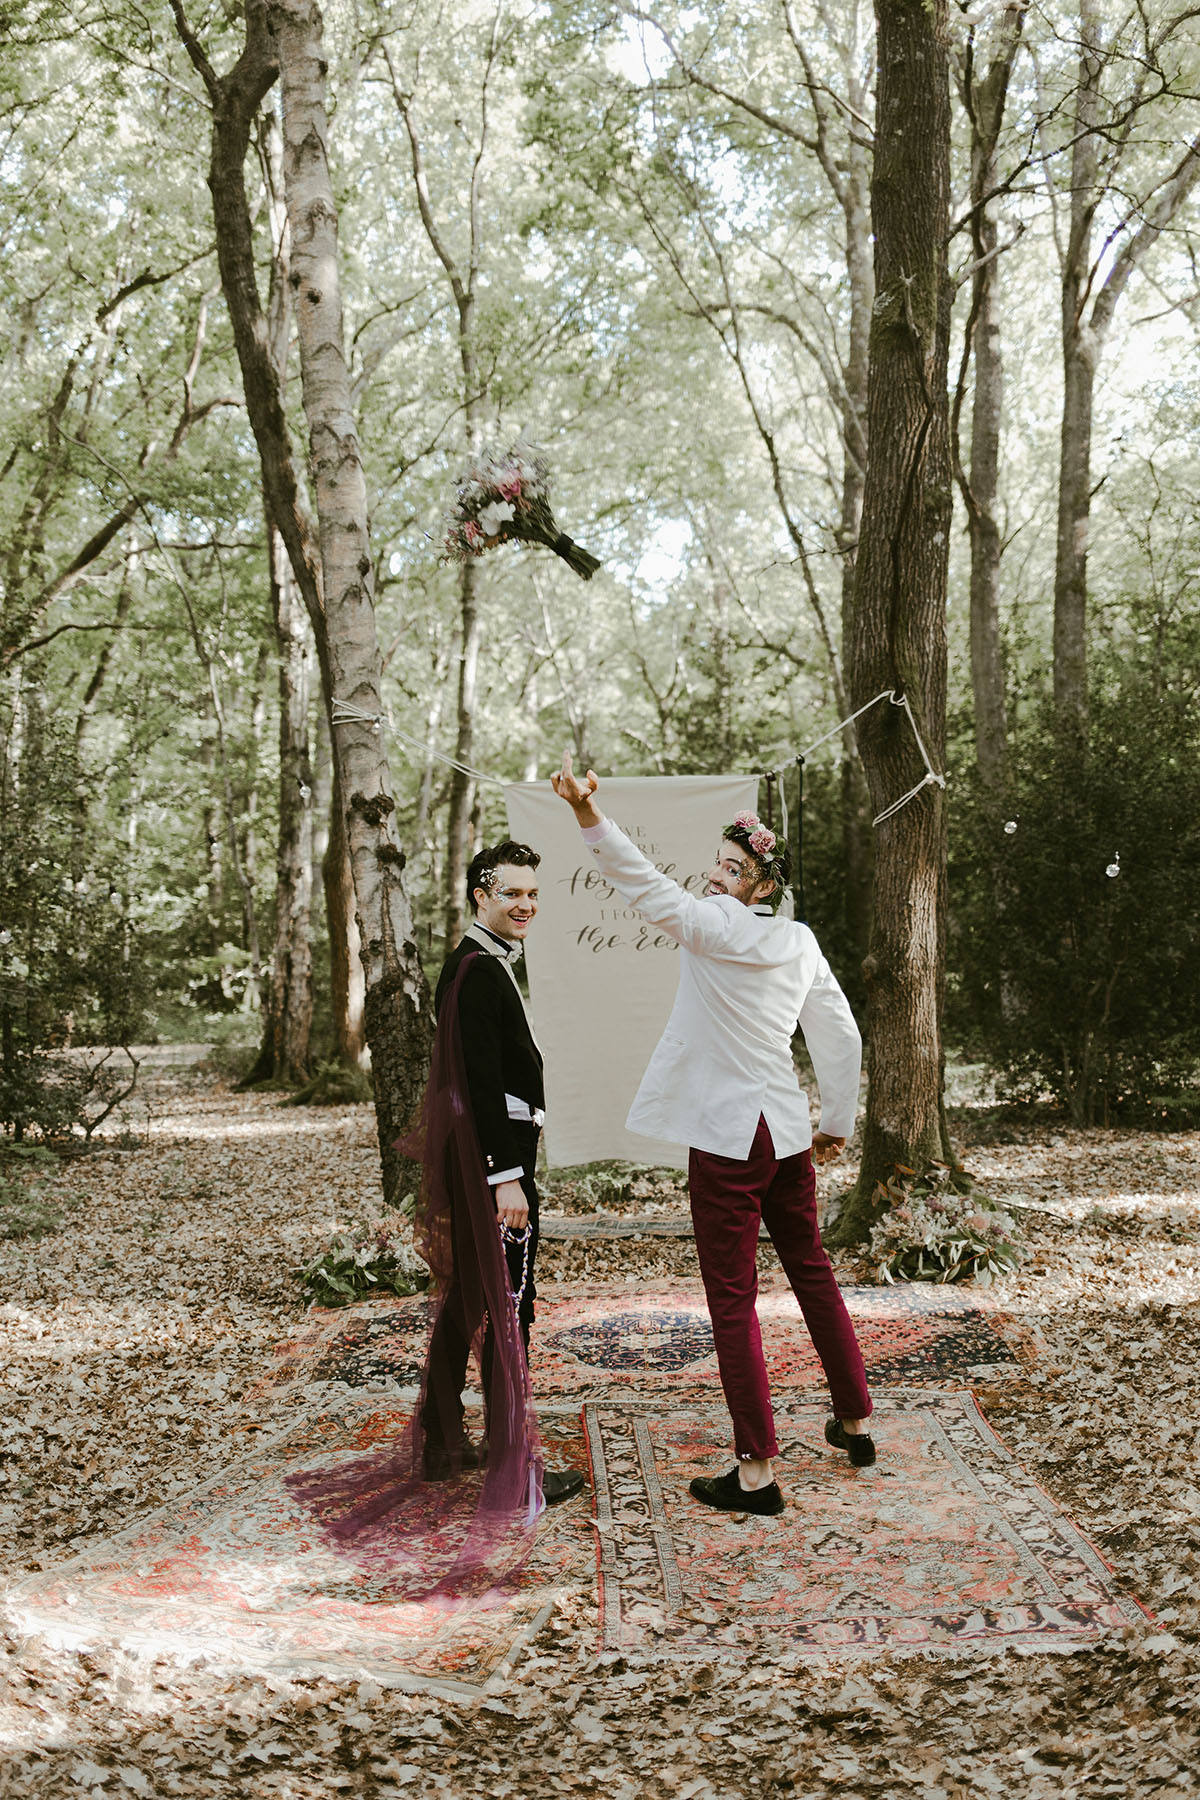 Creative wildflower elopement inspiration in the woods two grooms flowers floral veil suits creative unique styled shoot bouquet toss